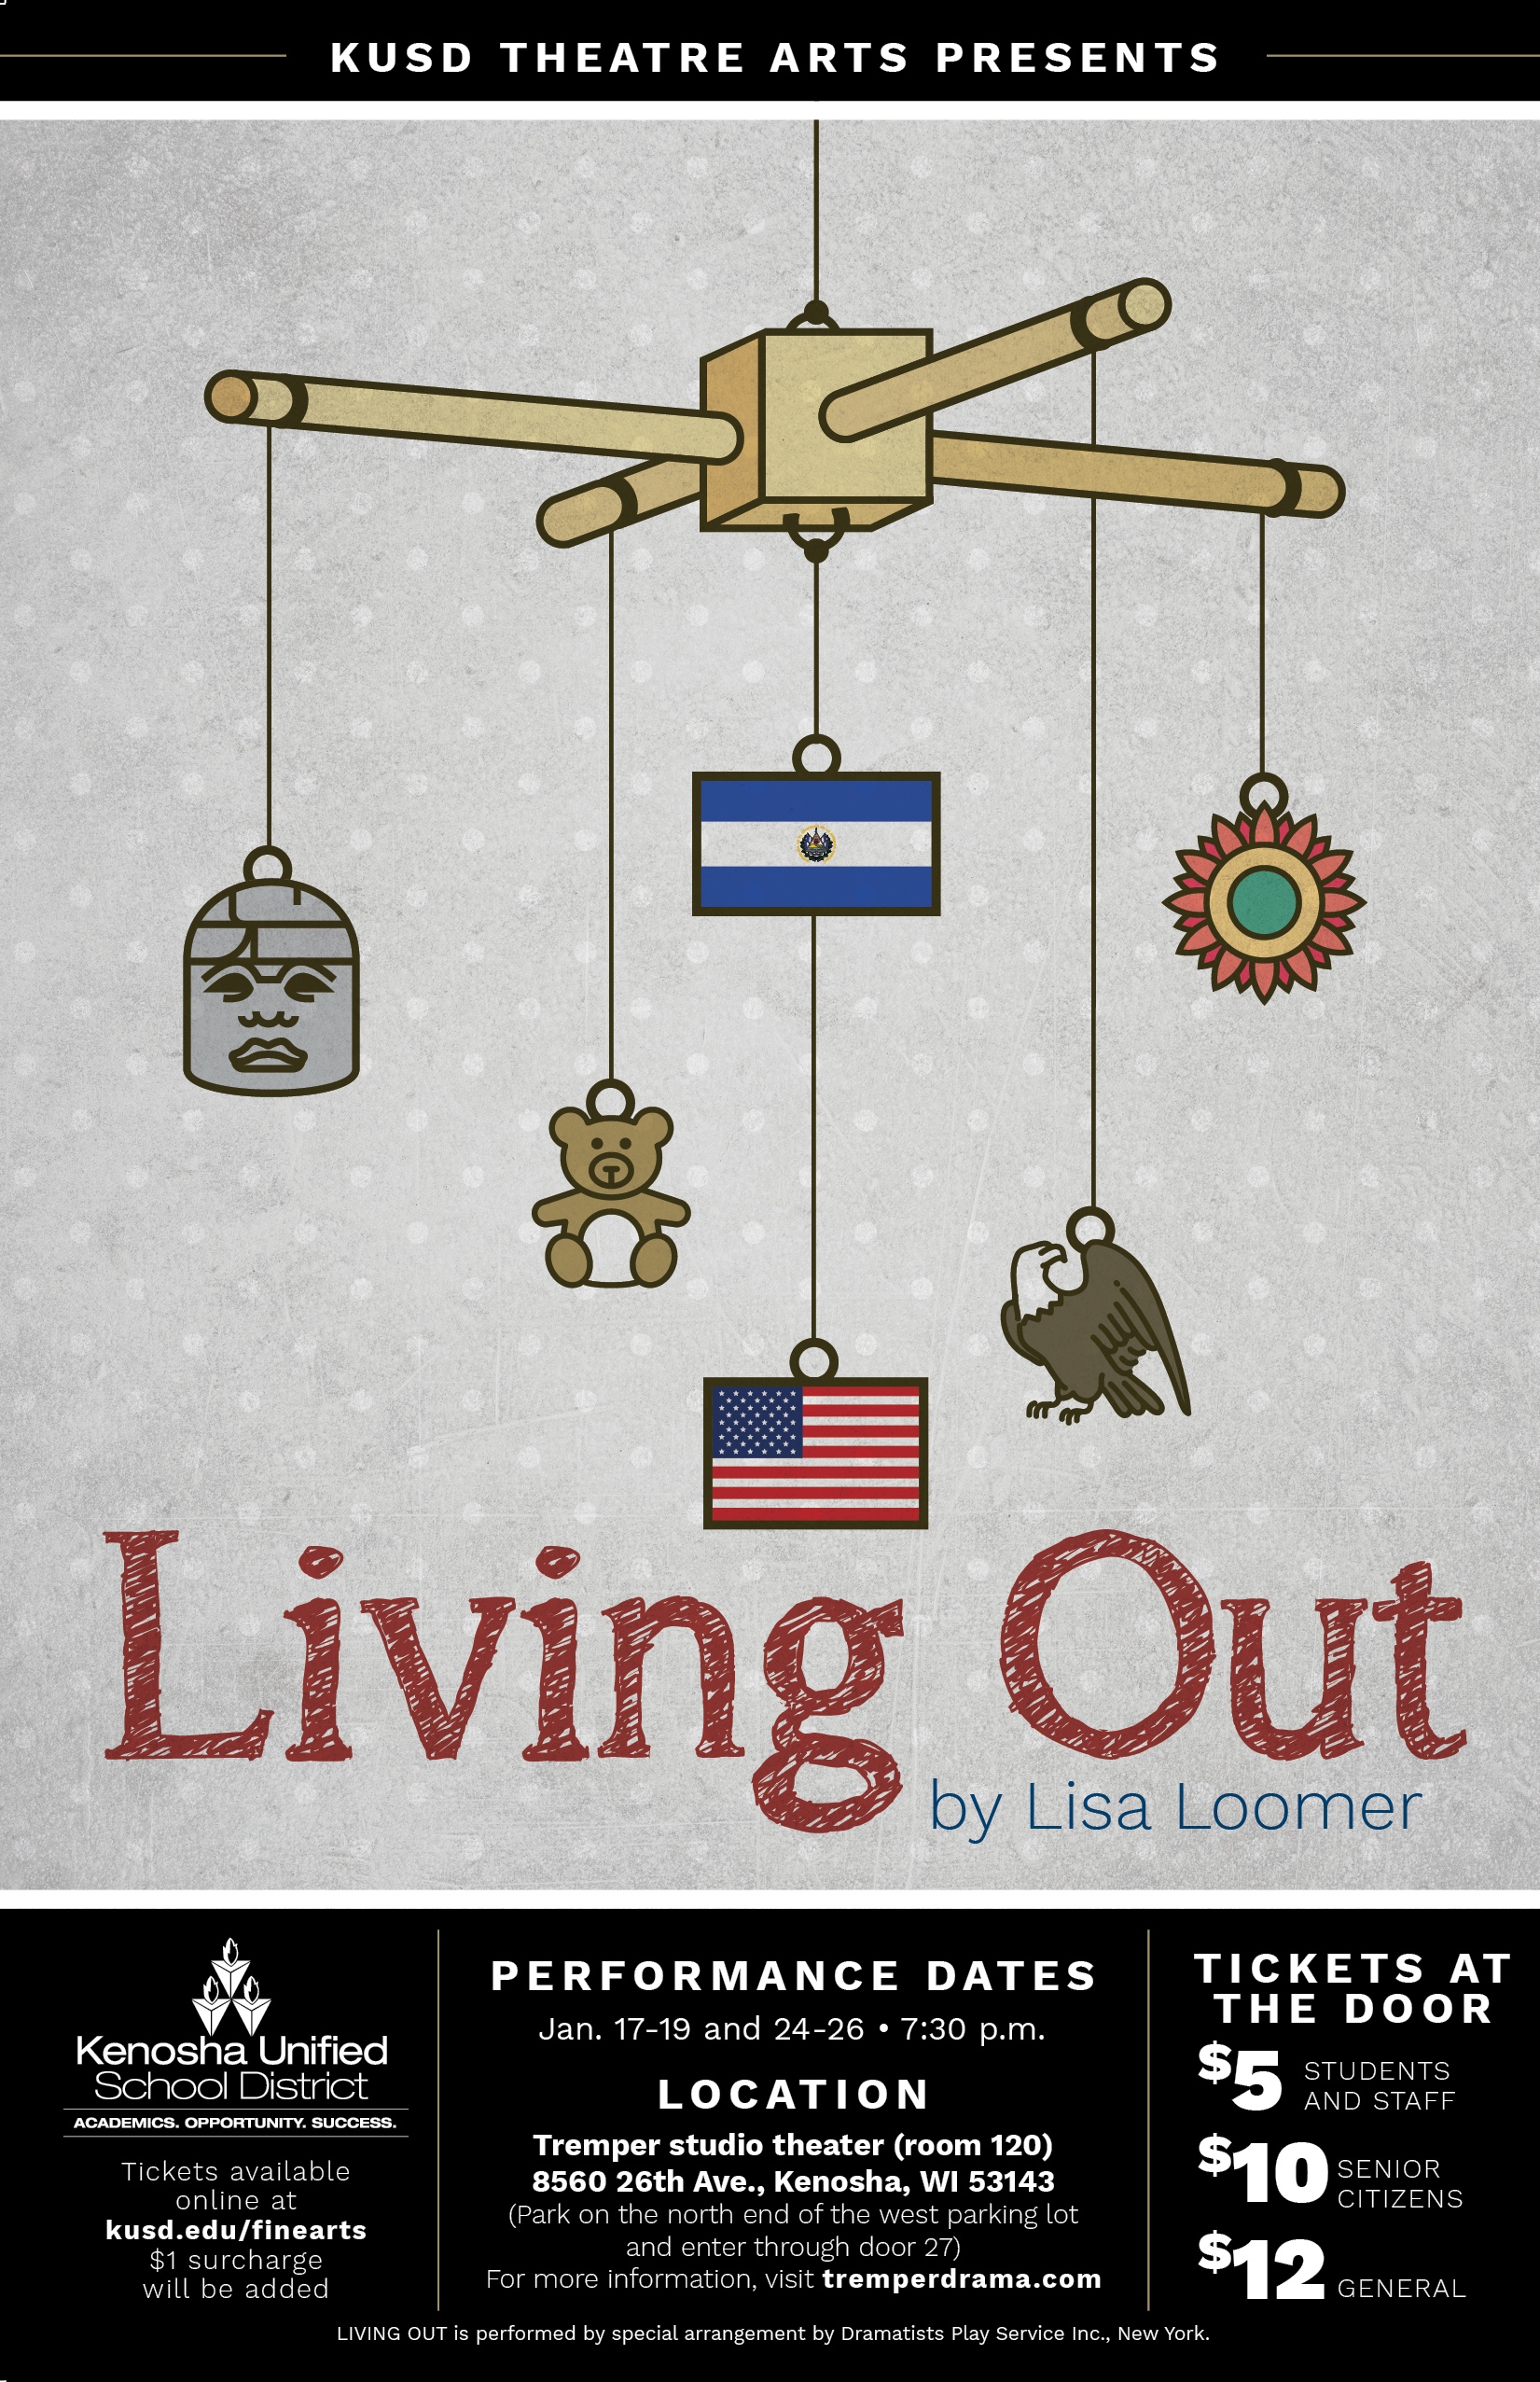 The poster for Living Out